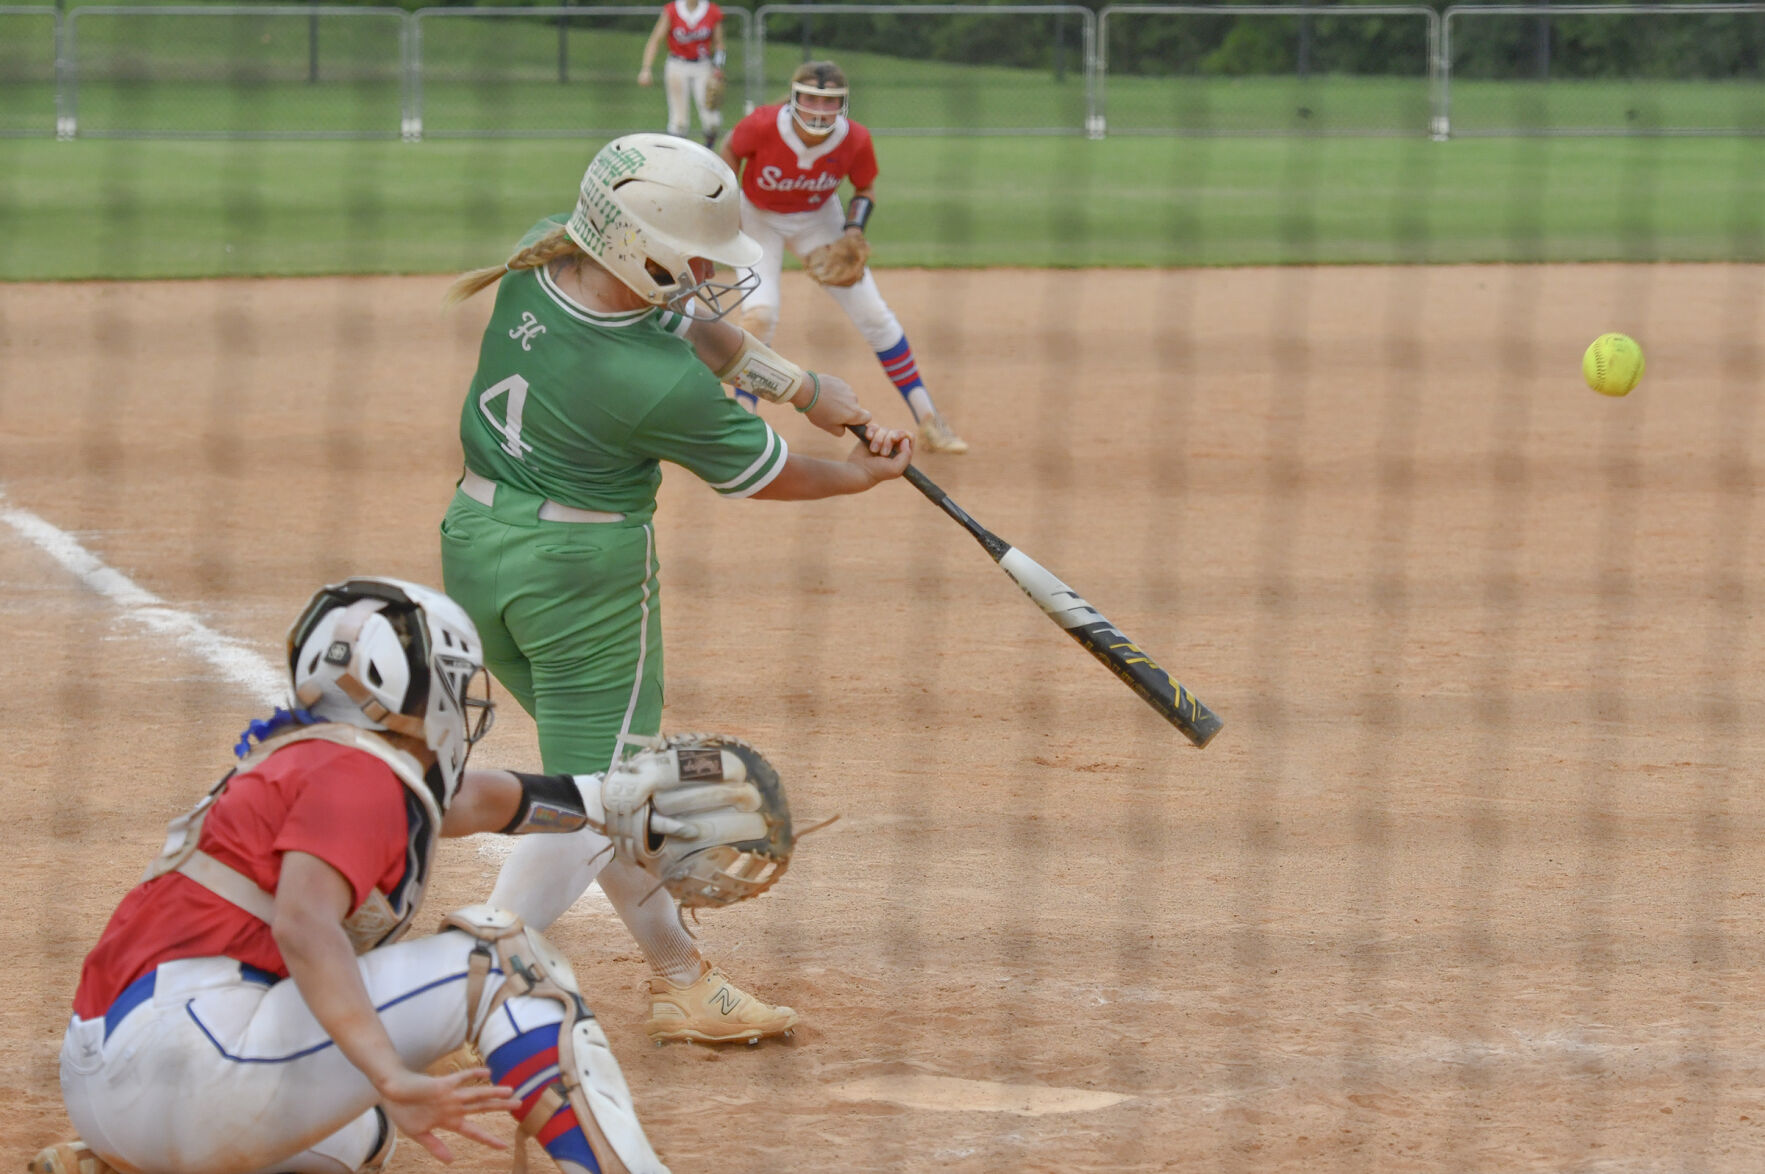 Clutch homers lead Holtville into regional championship